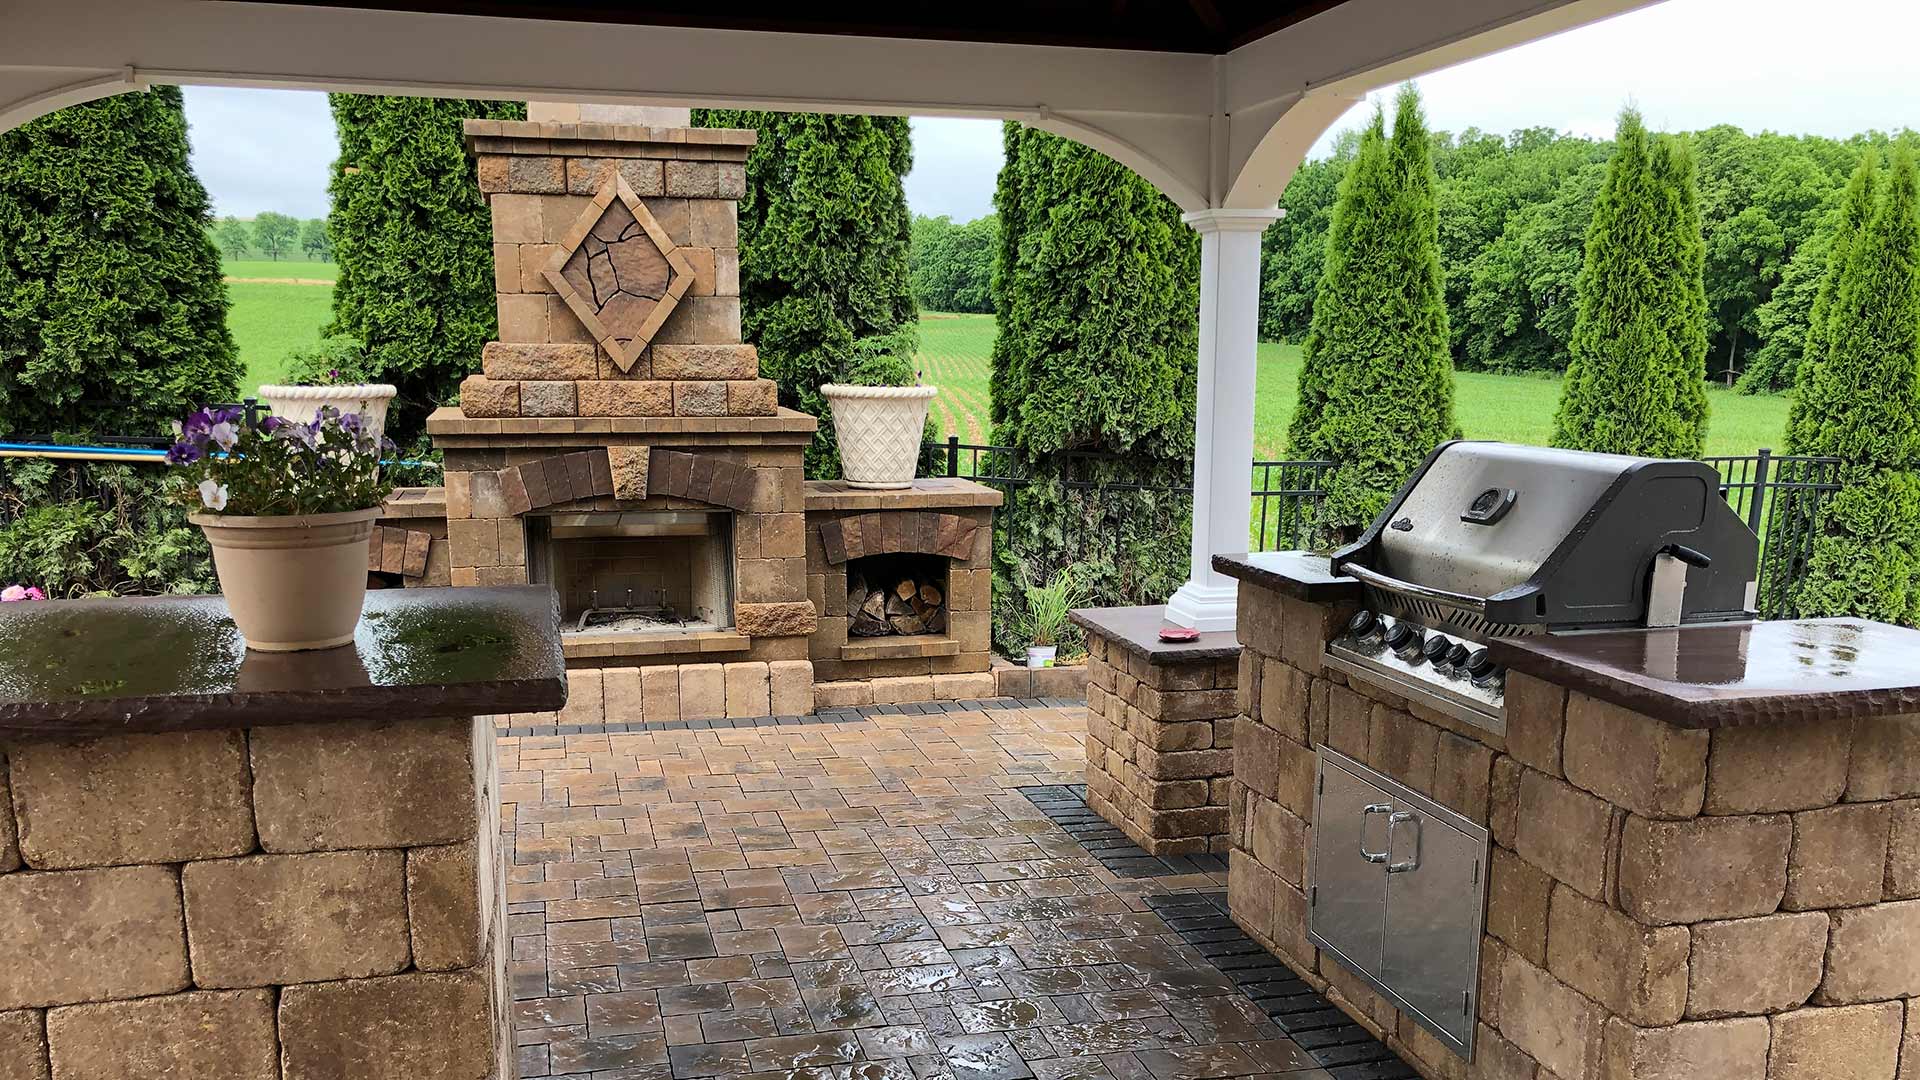 Beautiful outdoor living space with custom patio, outdoor kitchen, and fireplace near Clifton, NJ.